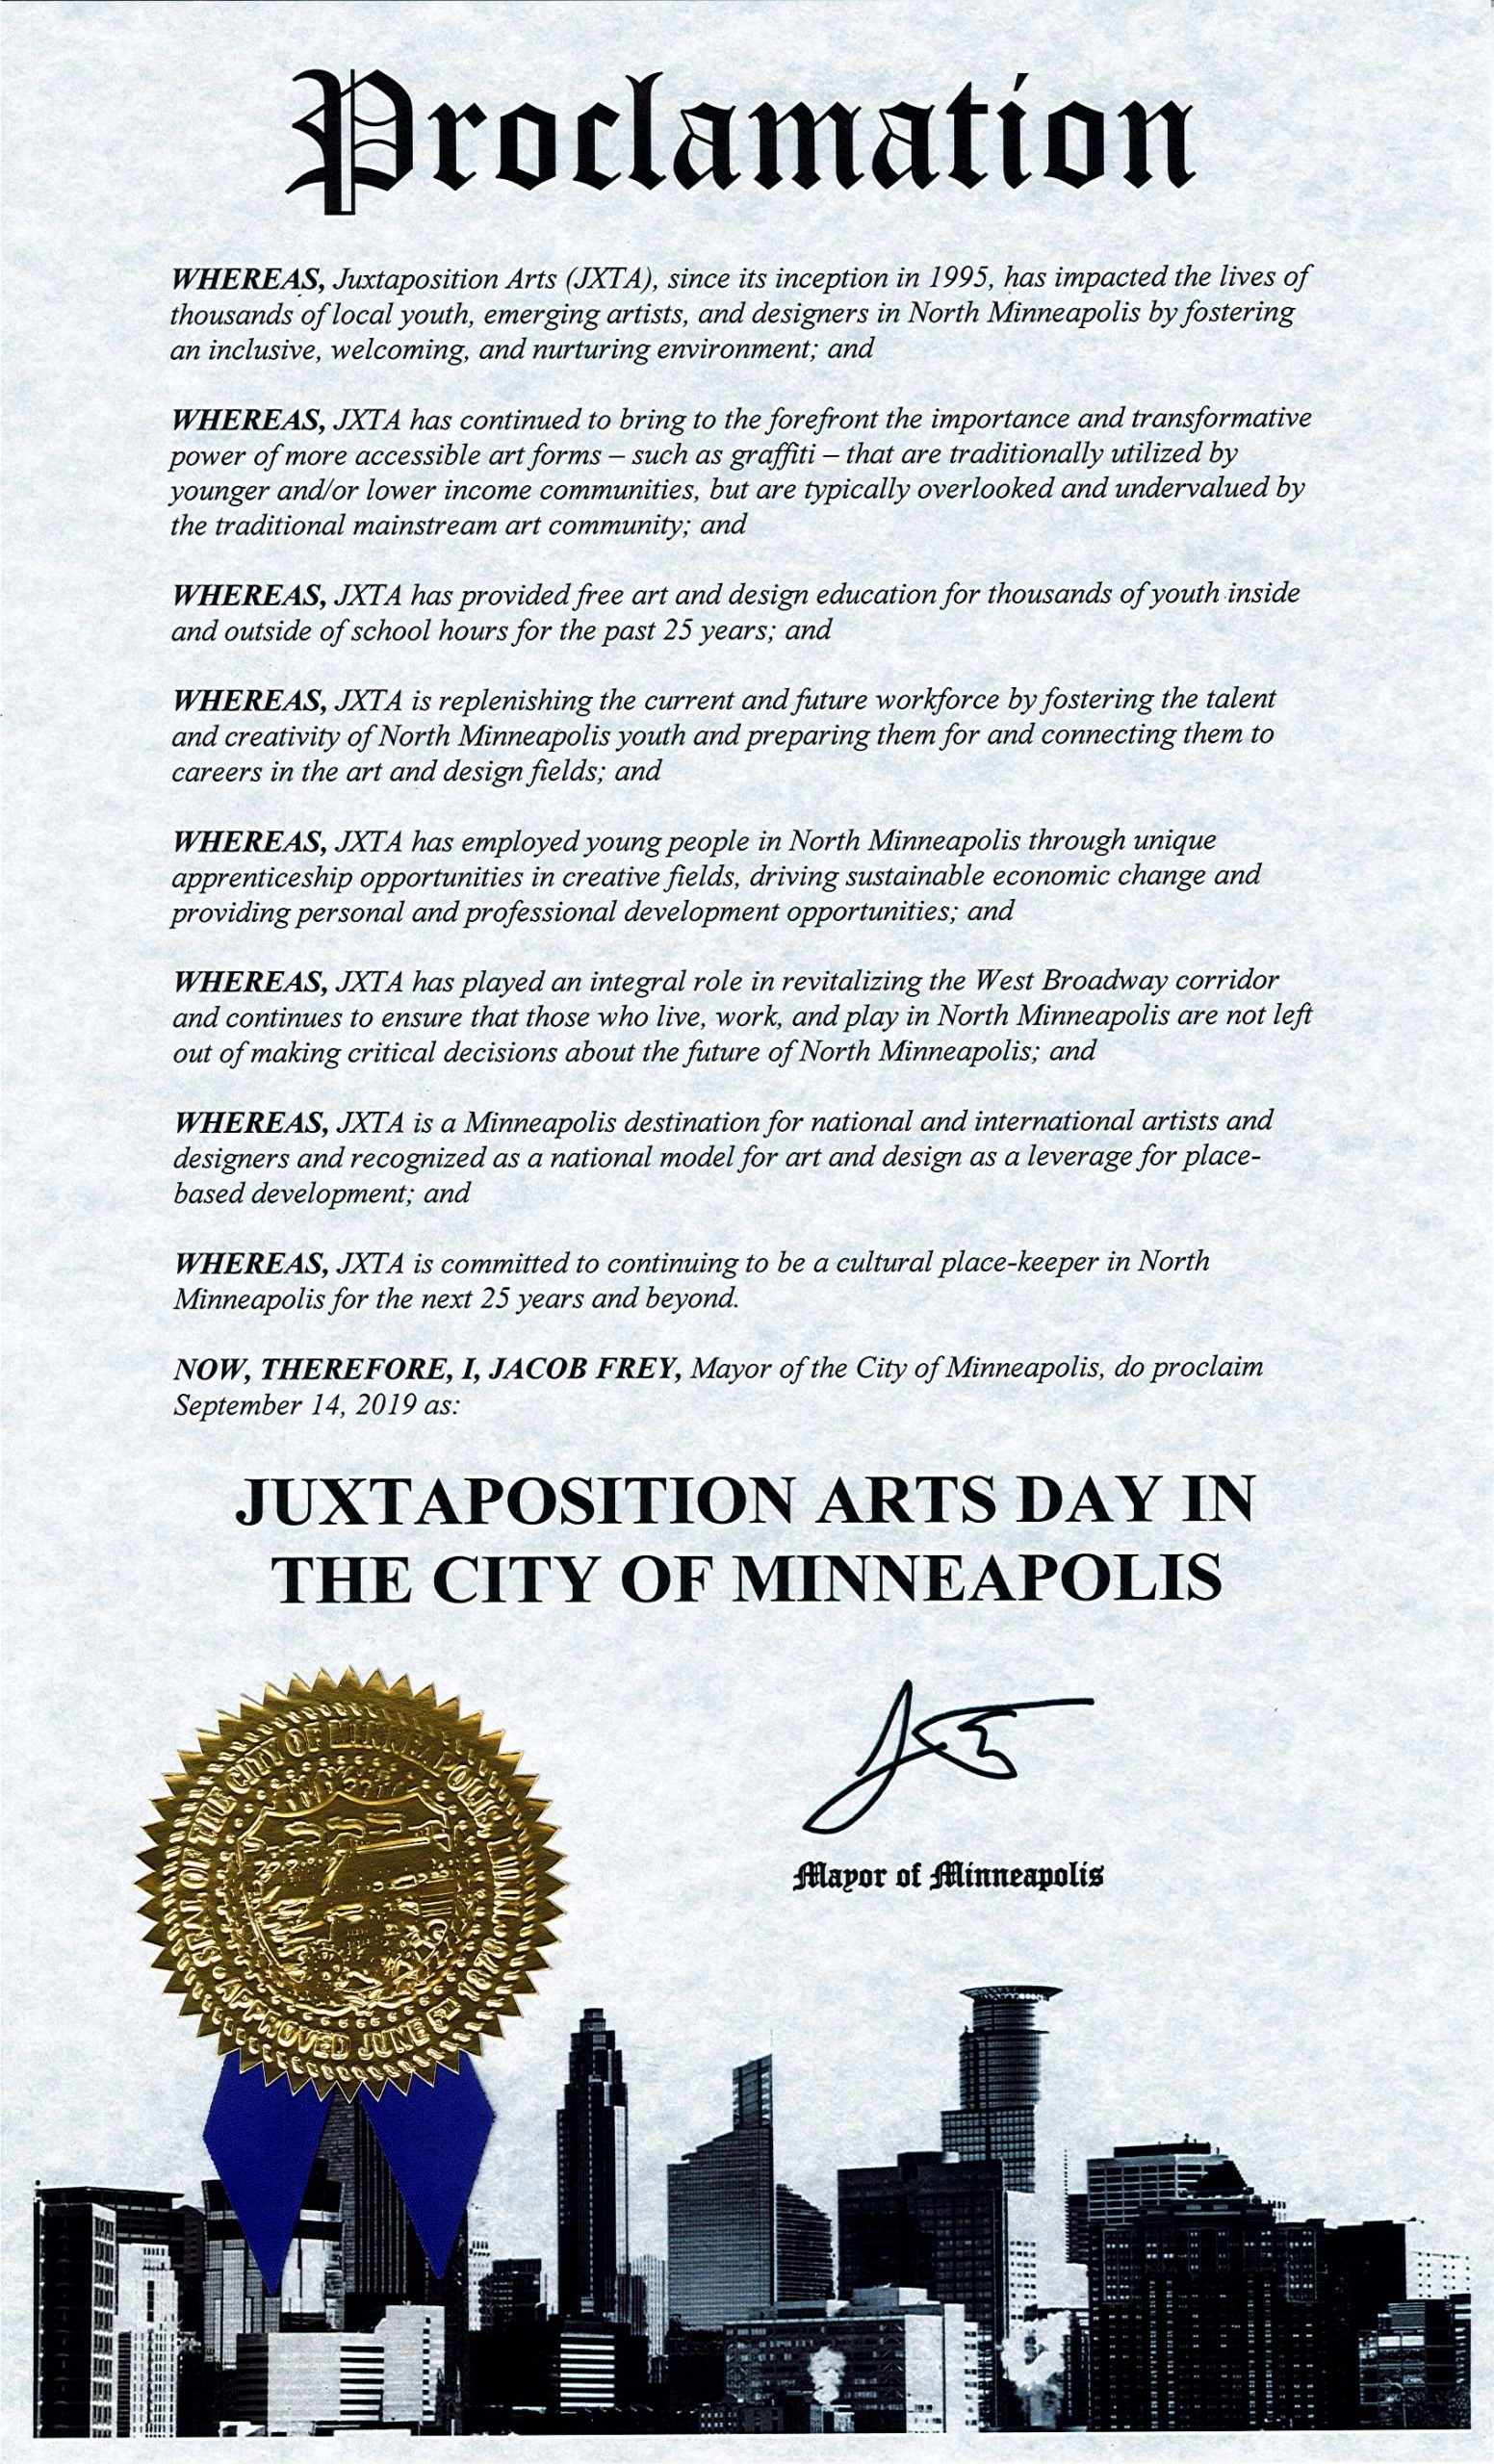 JXTA day proclamation declared in the City of Minneapolis